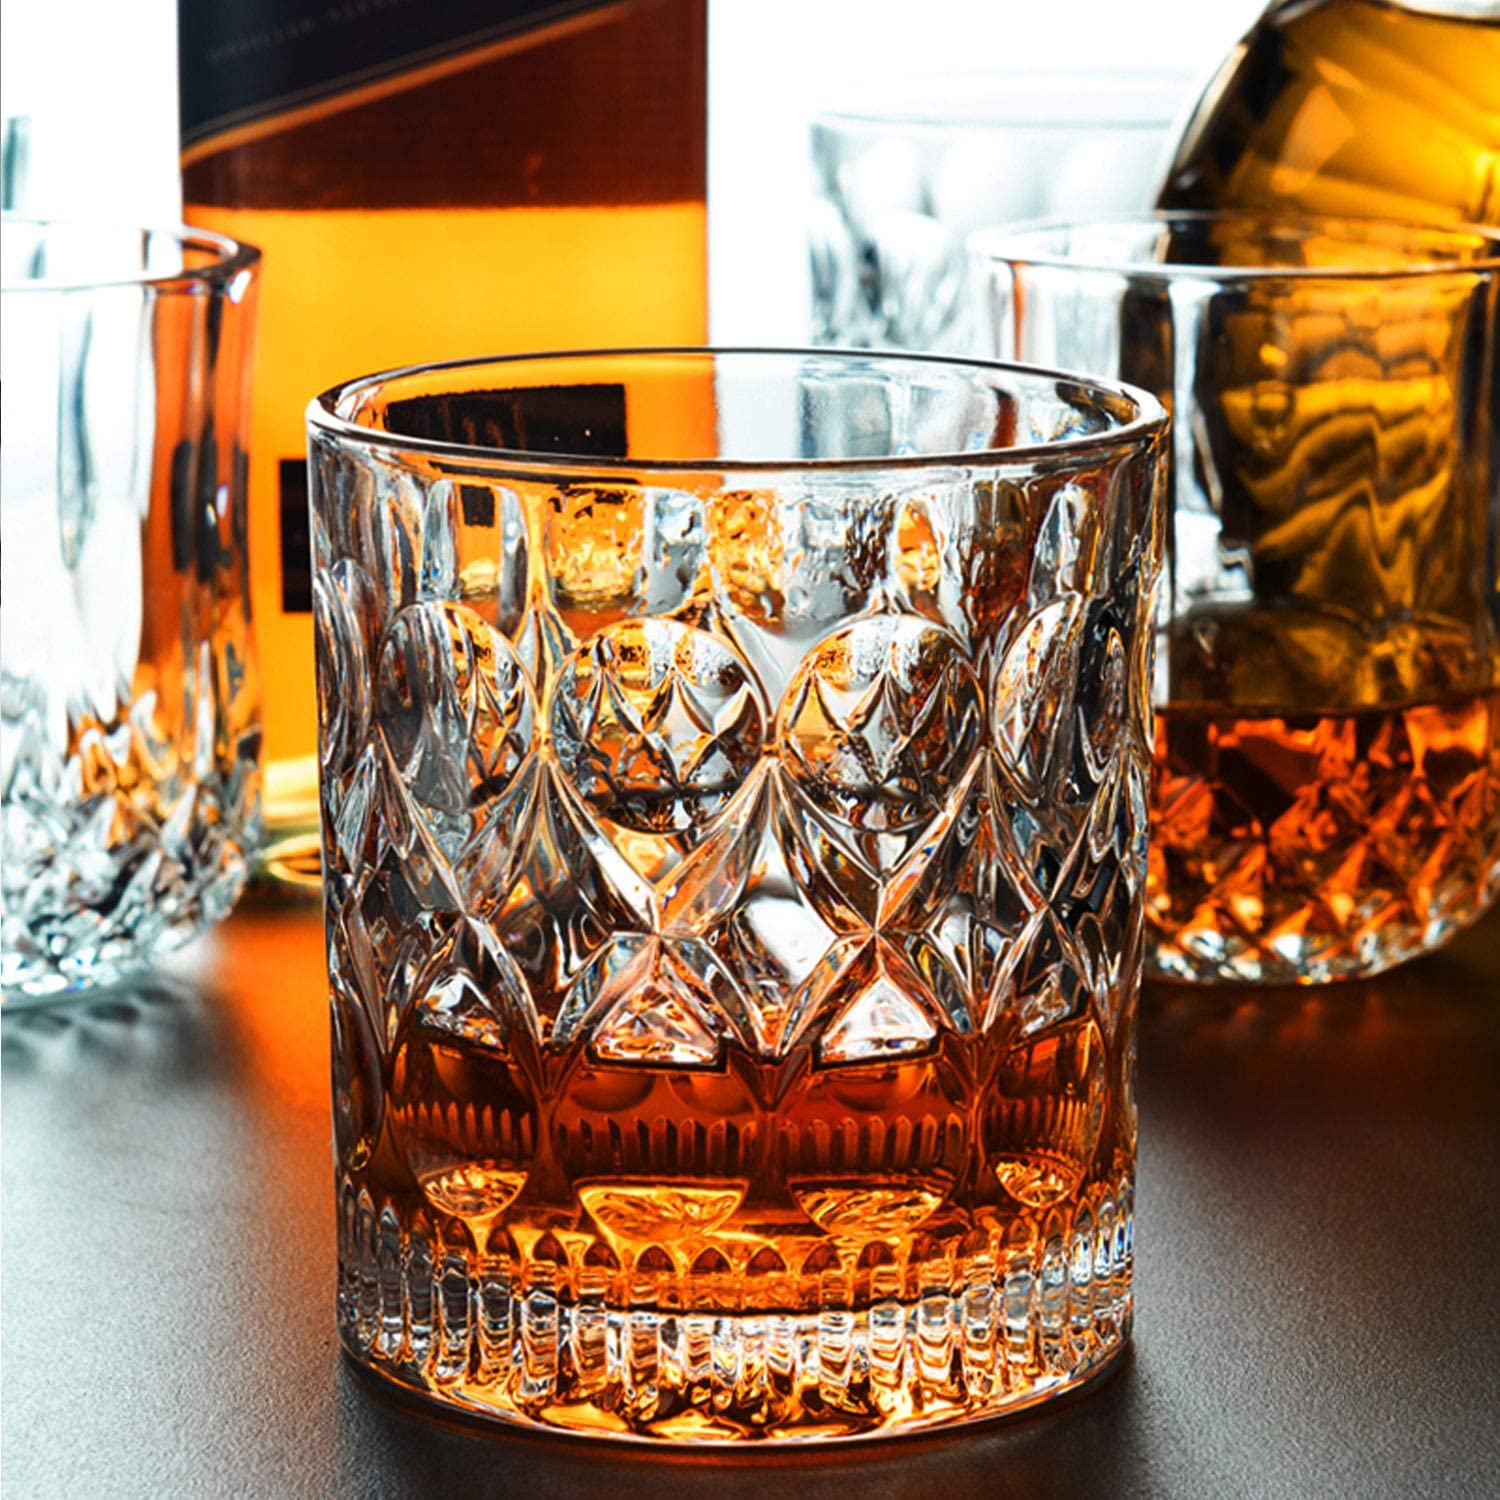 Old Fashioned Whiskey Glasses with Luxury Box - 10 Oz Rocks Barware For  Scotch, Bourbon, Liquor and Cocktail Drinks - Set of 4